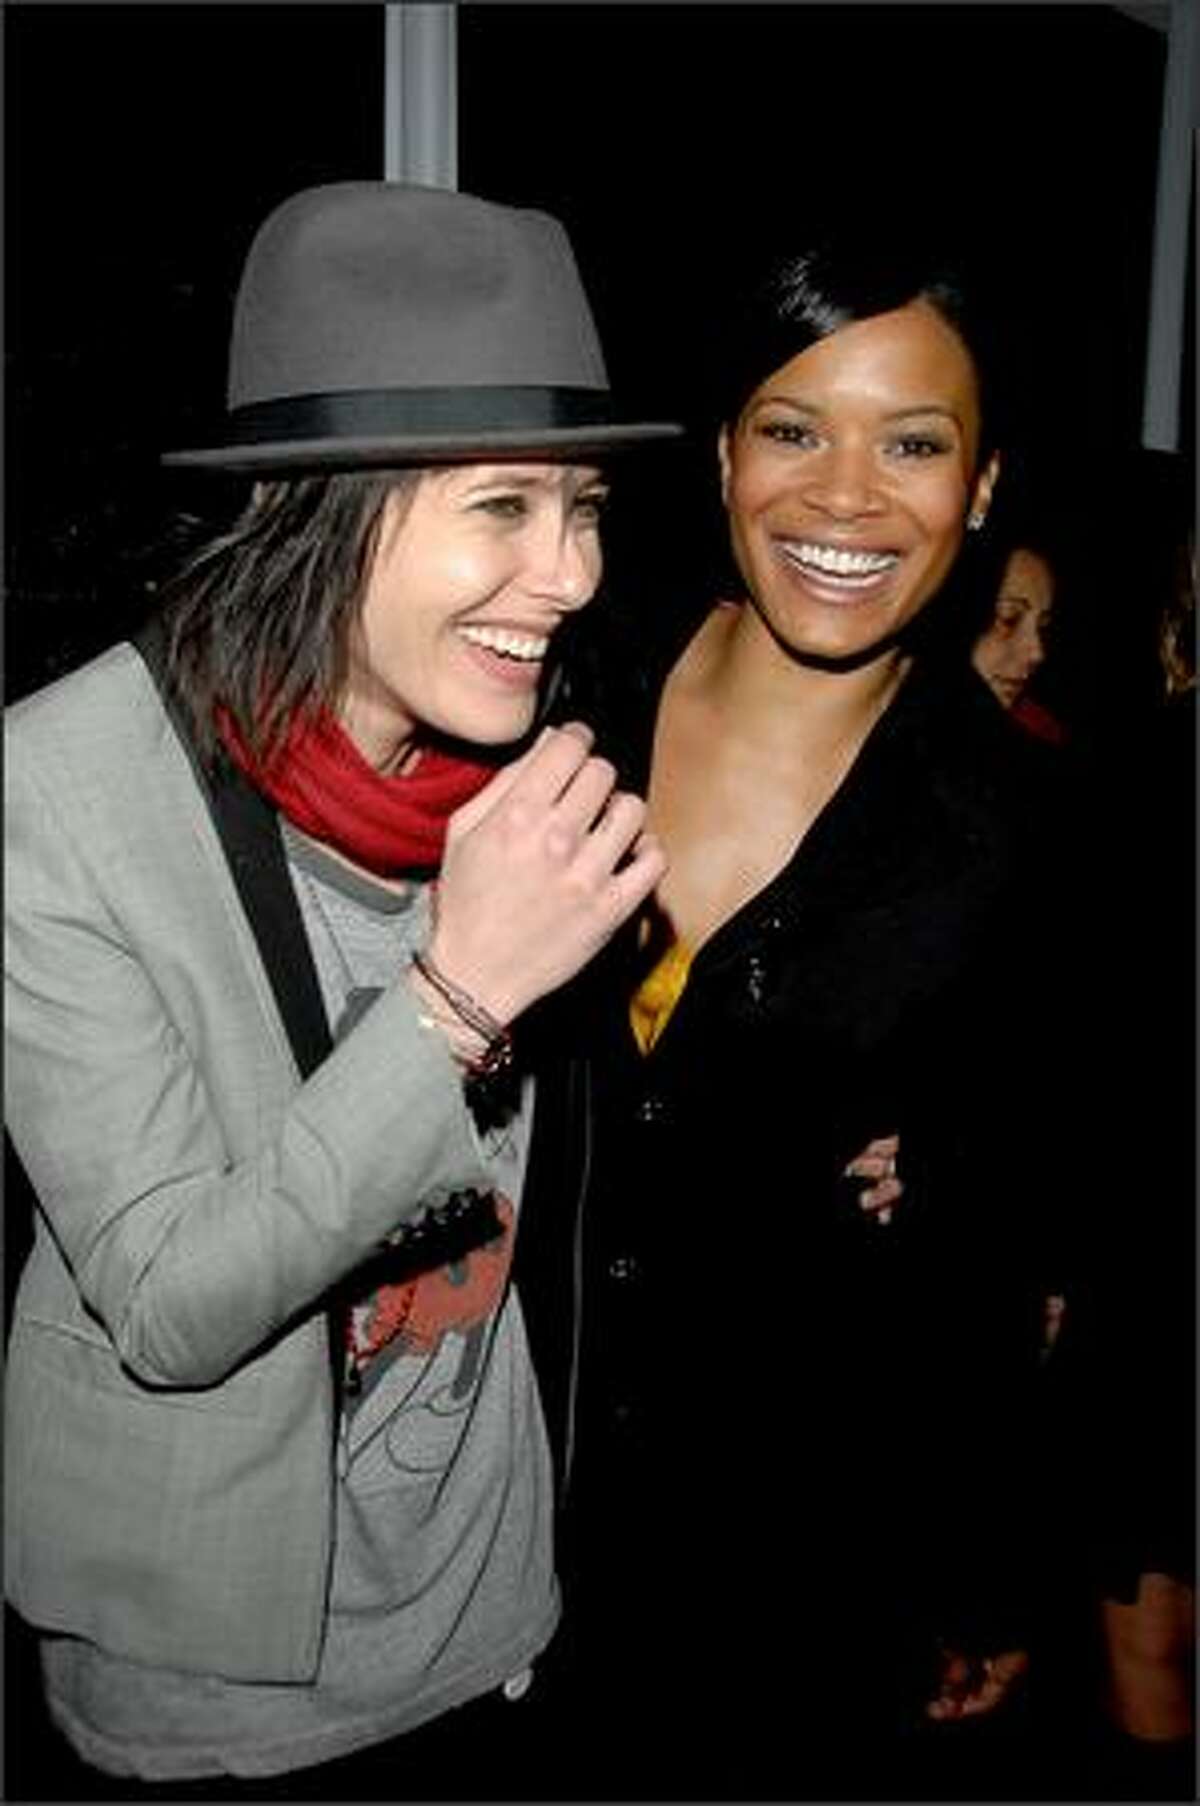 (L-R) Actors Katherine Moenning and Rose Rollins attend the season 5 premiere party for "The L Word" at The Factory in West Hollywood, California.